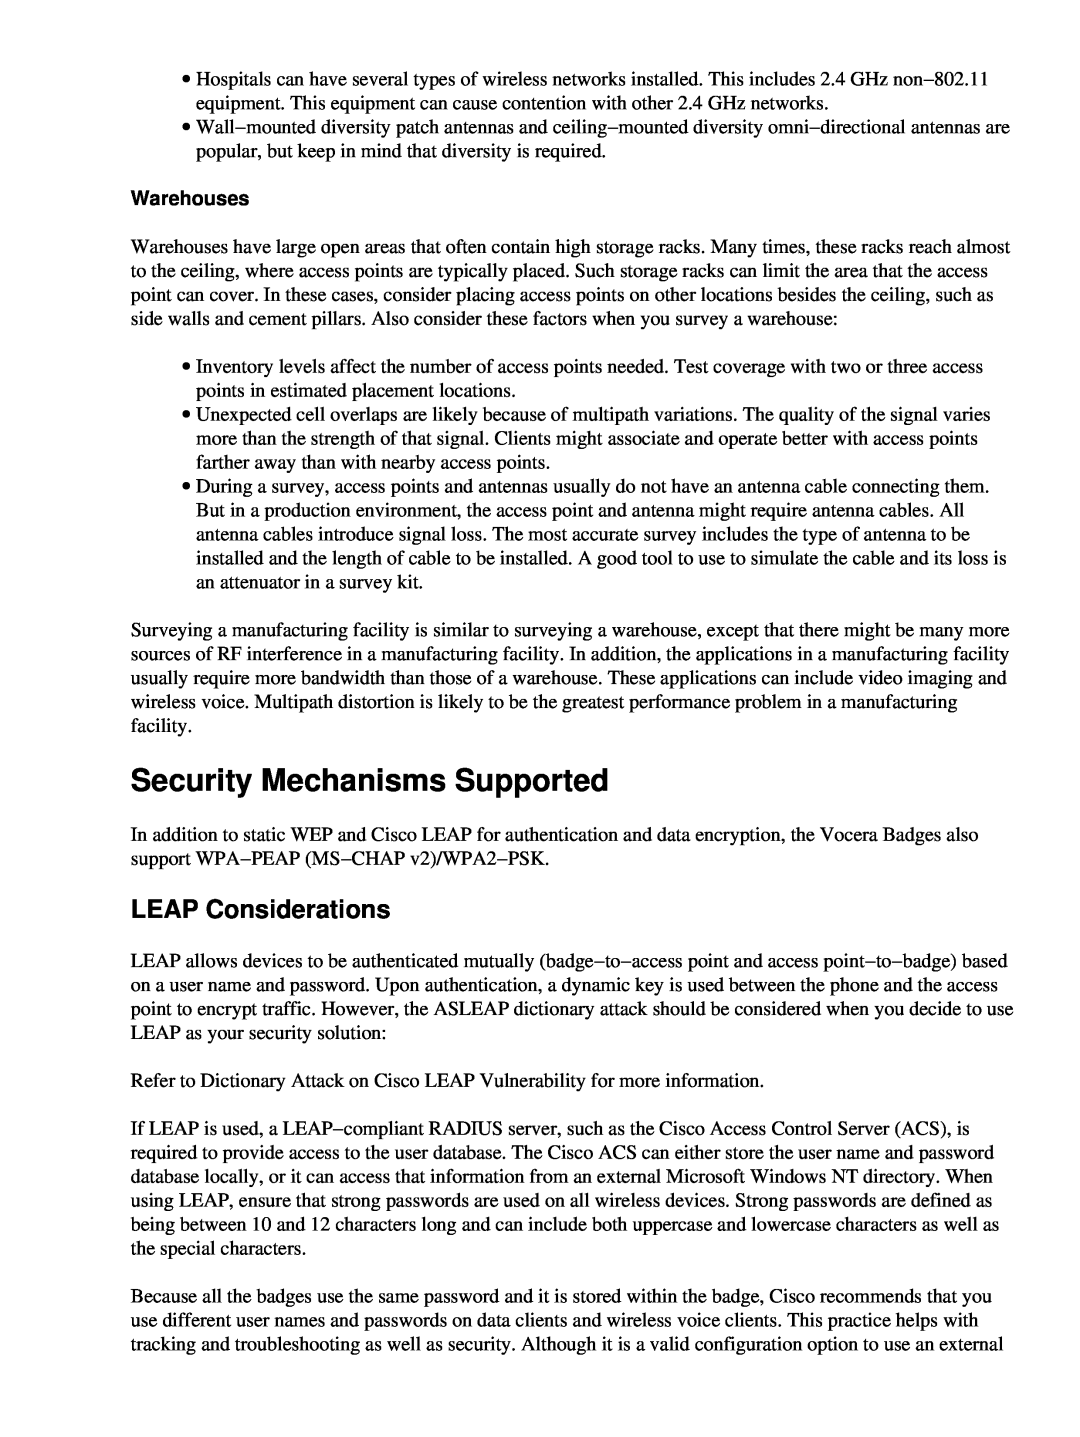 Cisco Systems 71642 manual Security Mechanisms Supported, LEAP Considerations, Warehouses 